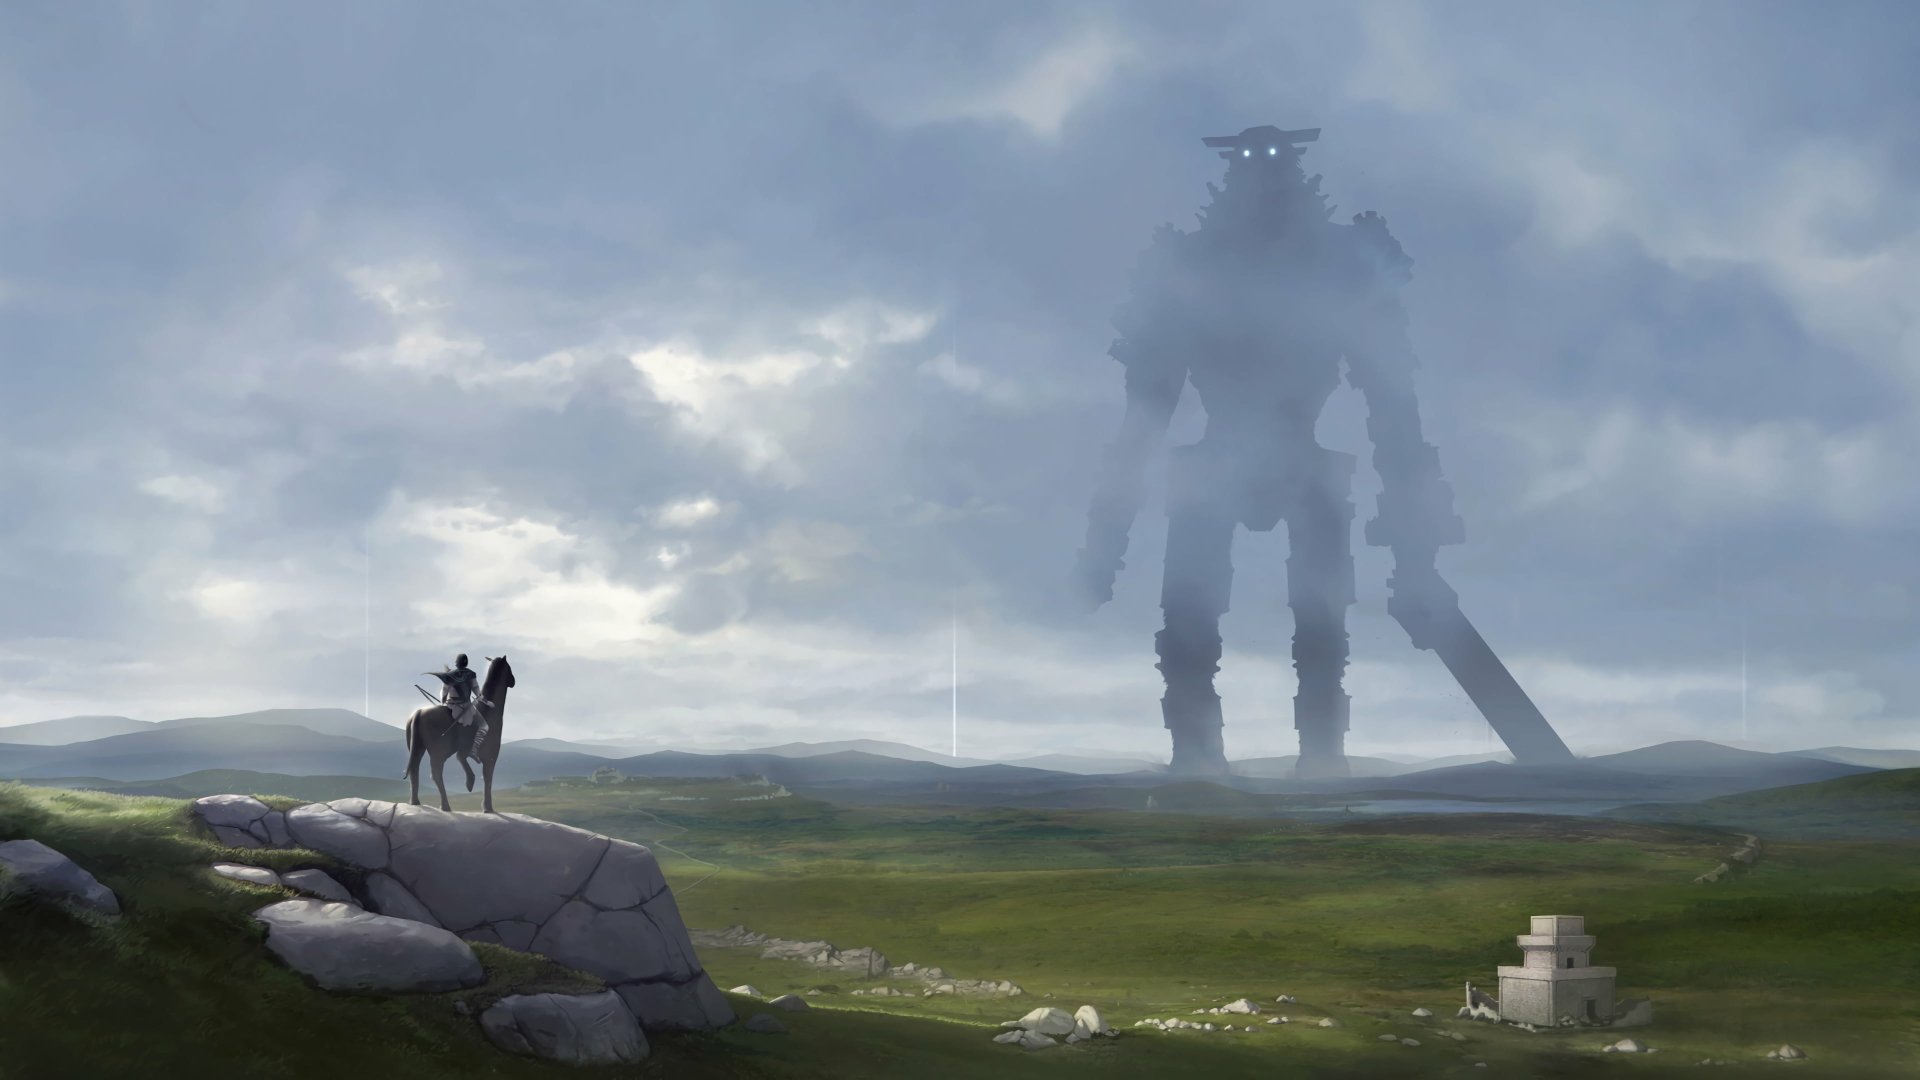 50+ Shadow Of The Colossus HD Wallpapers and Backgrounds